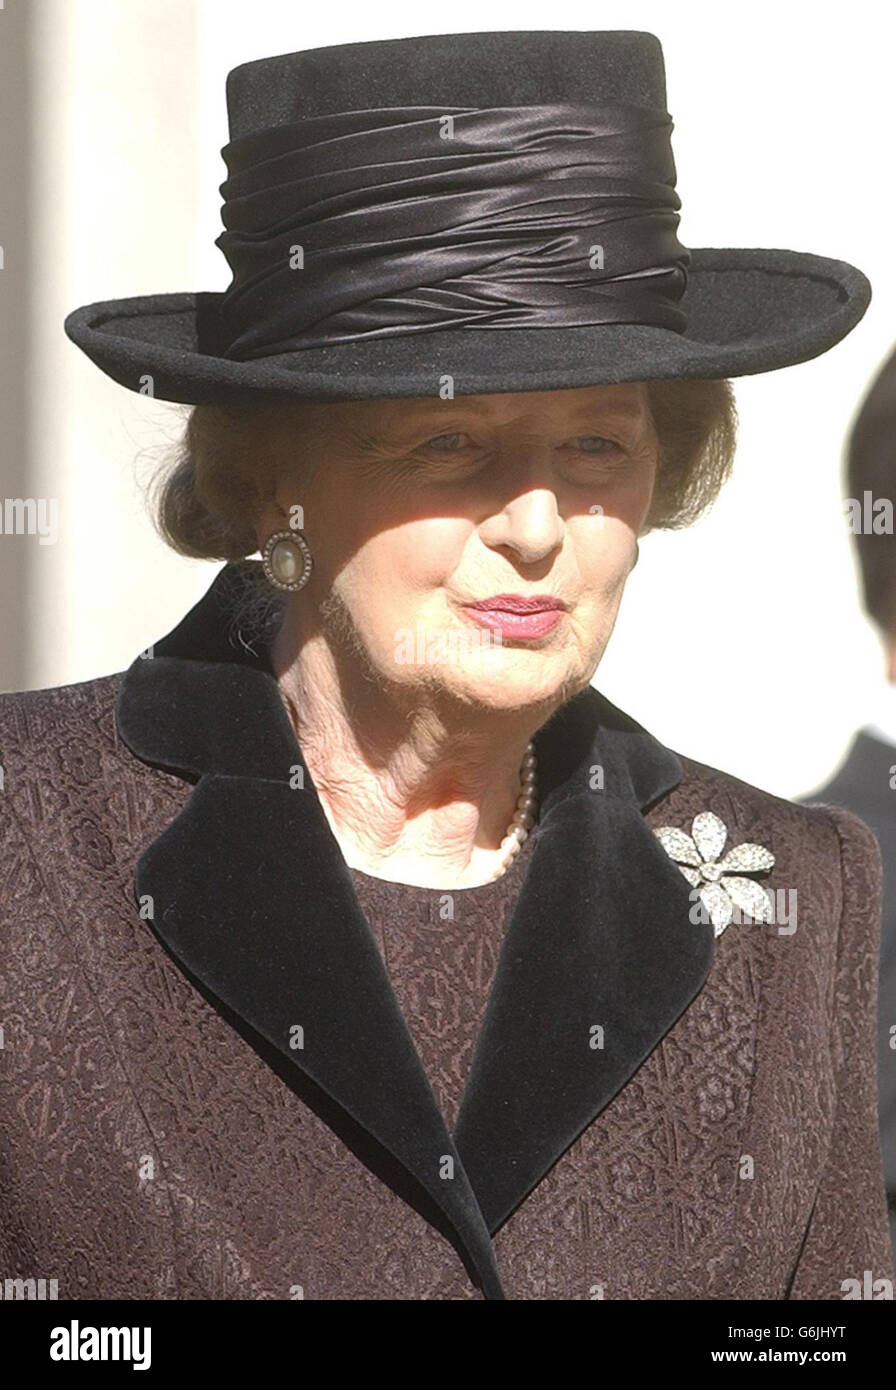 Former Prime Minister Baroness Thatcher, arrives for the memorial service for her late husband Denis Thatcher in The Guards Chapel, Birdcage Walk, London. Sir Denis died in June, aged 88 having undergone major heart surgery some six months earlier, from which it was thought he had made a good recovery. Stock Photo